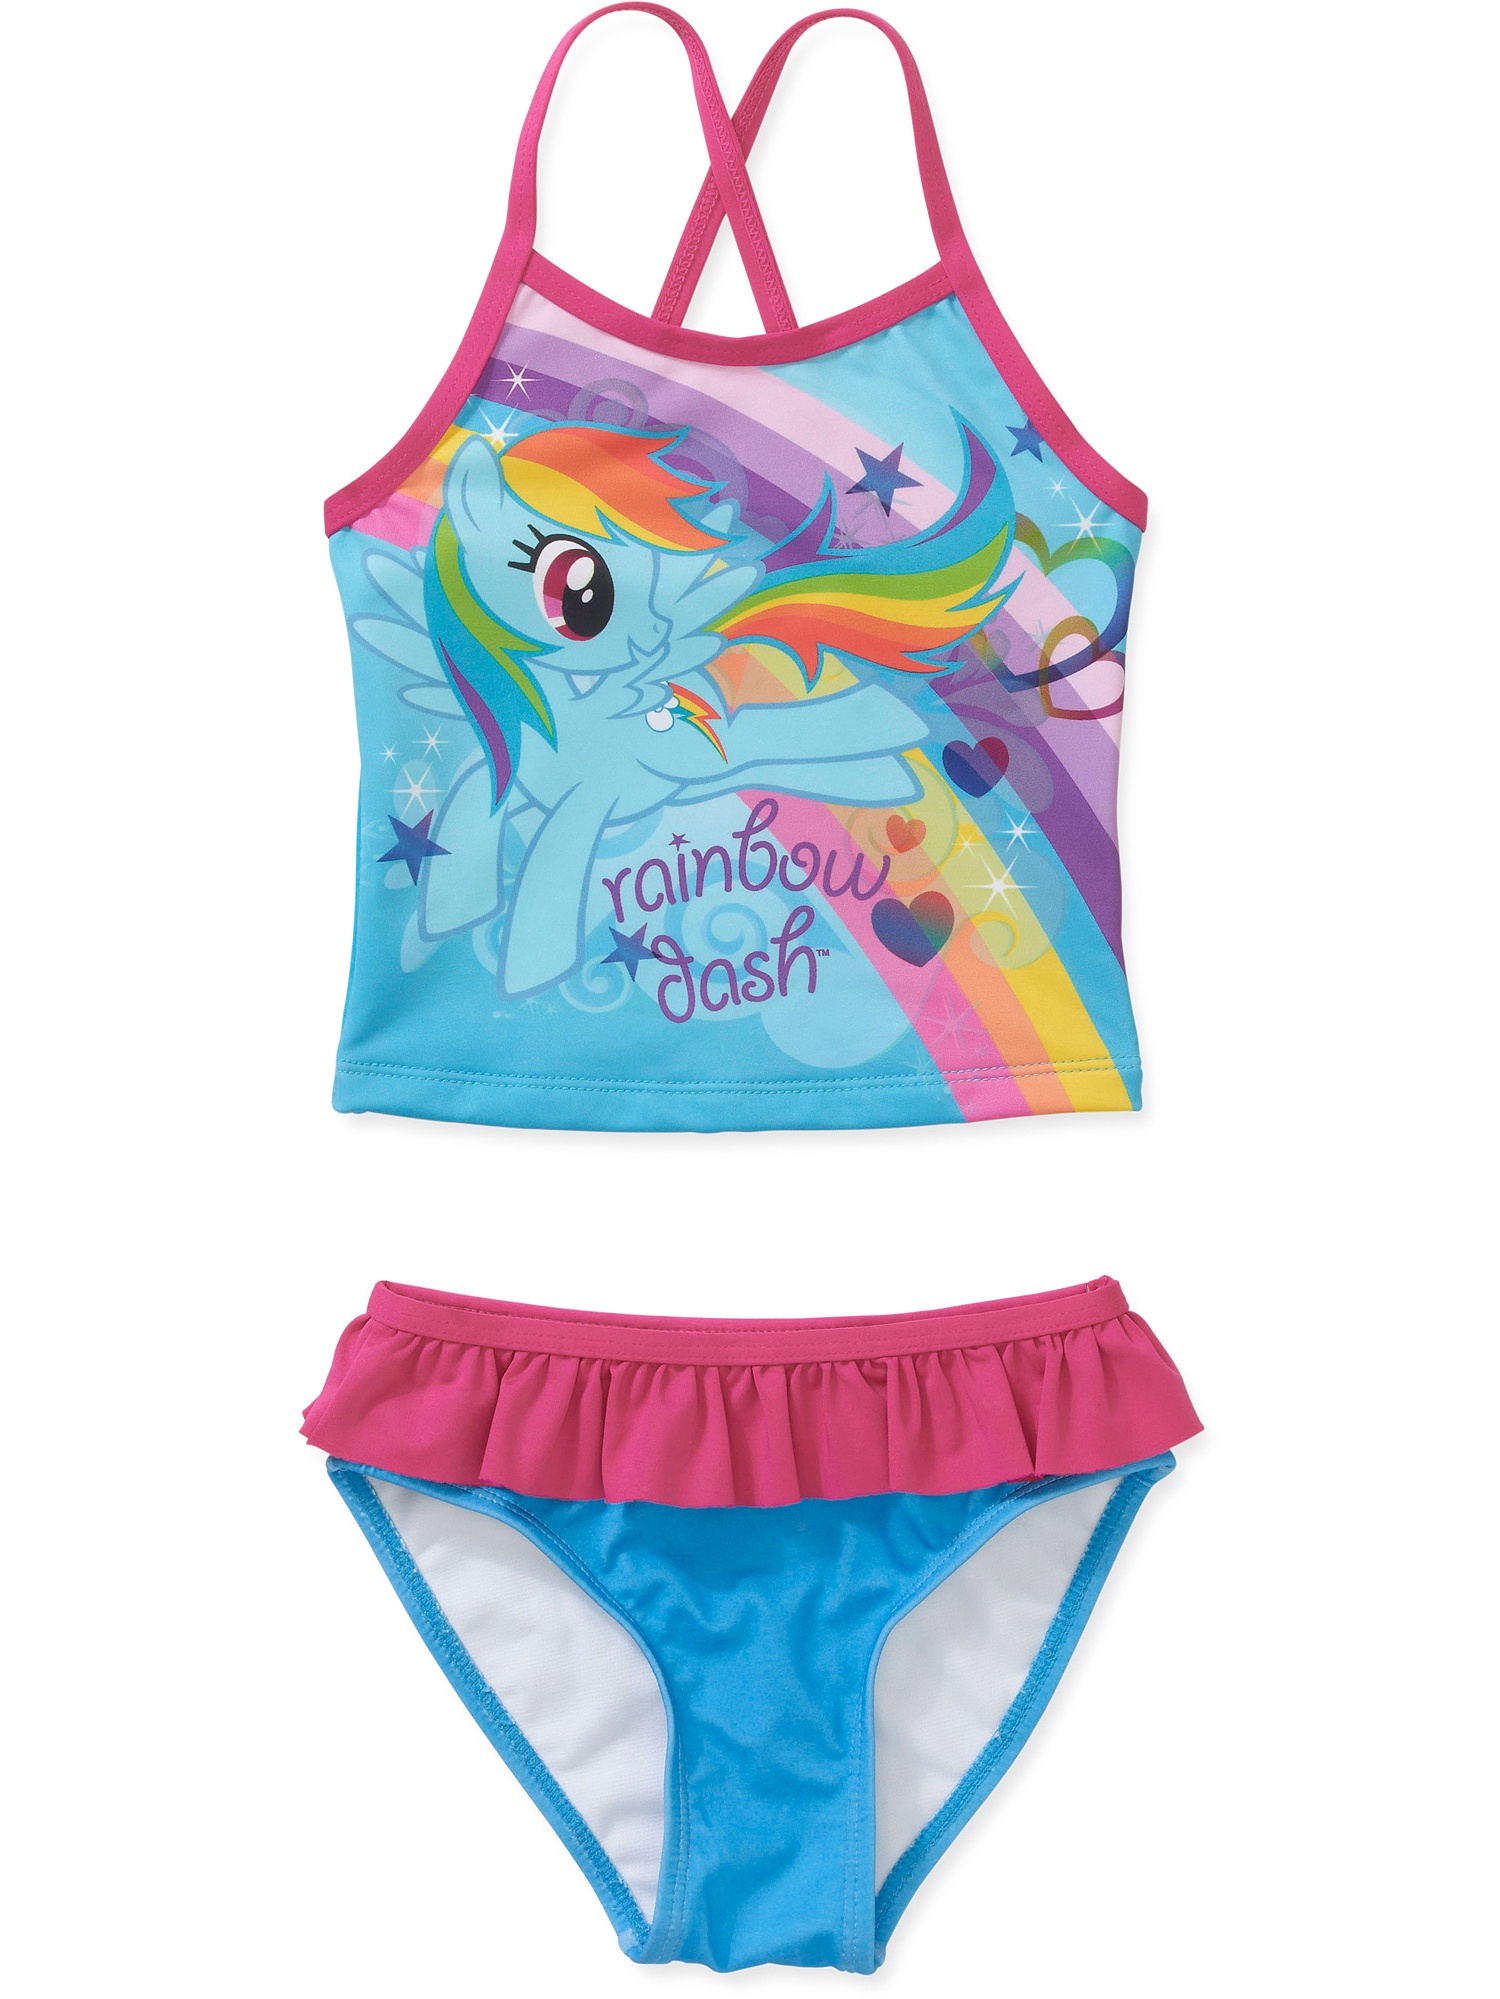 ^^my Little Pony Toddler Girl 2-piece Ru - image 1 of 1